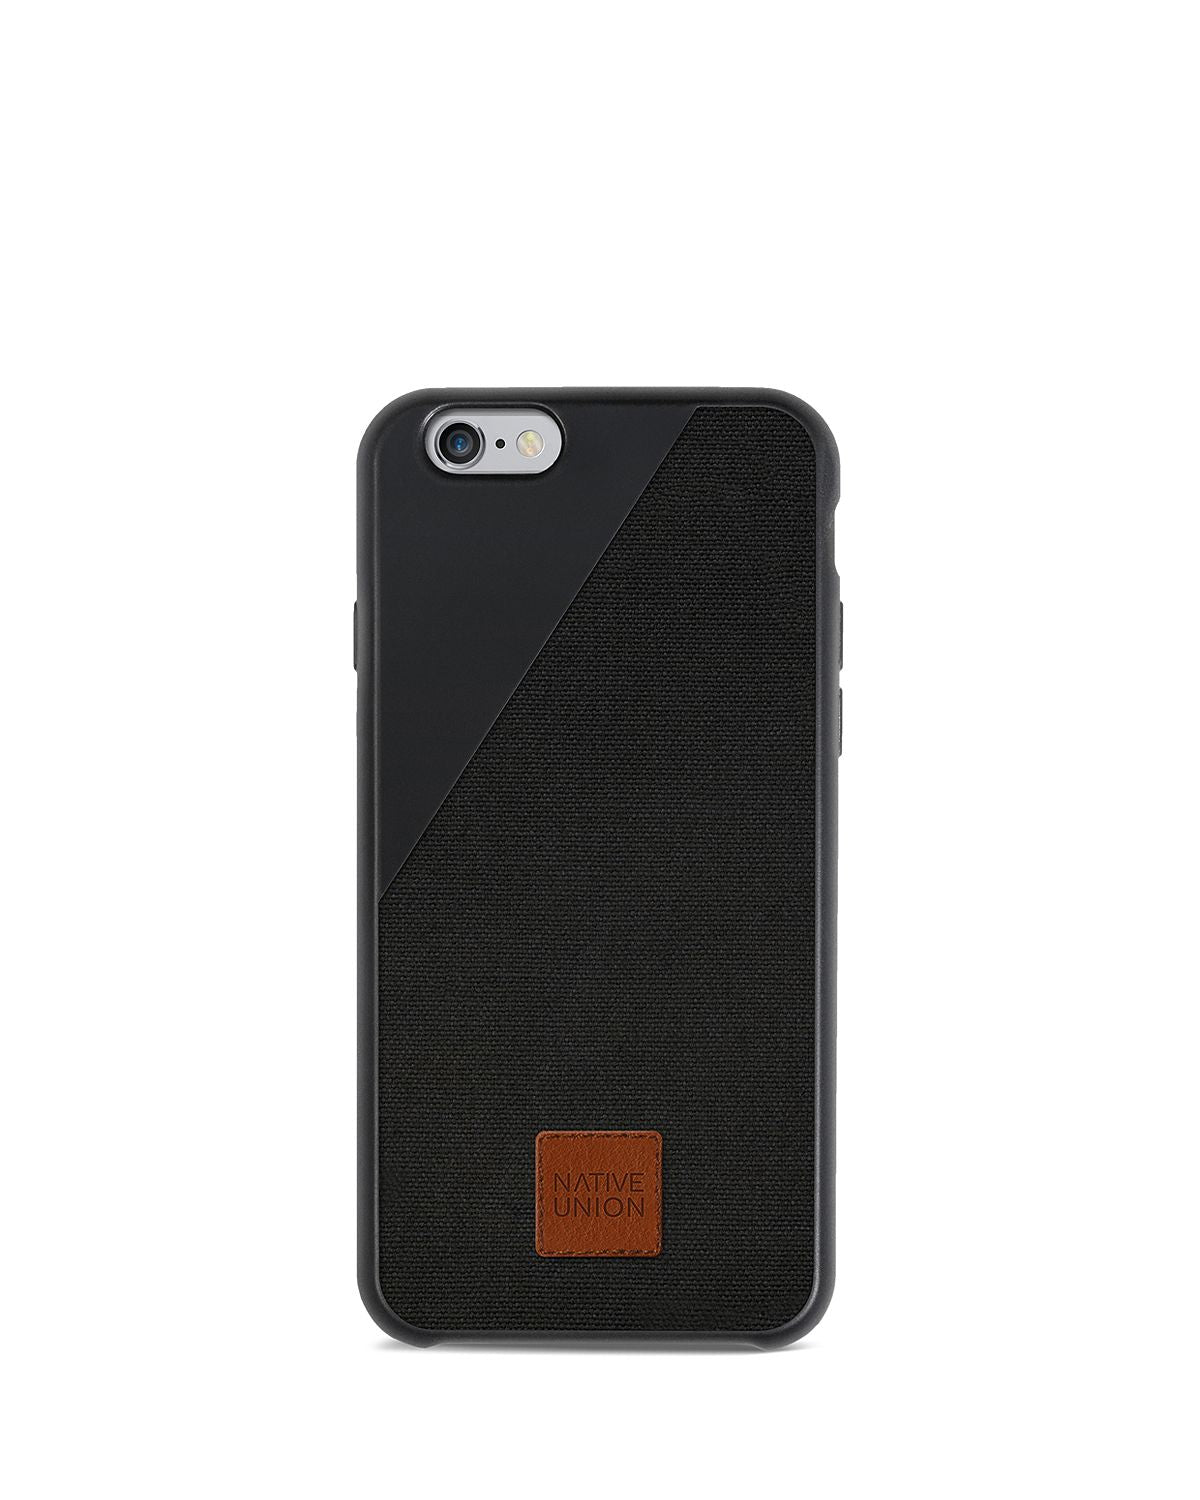 Native Union Clic 360 Iphone 6/6s Case Charcoal